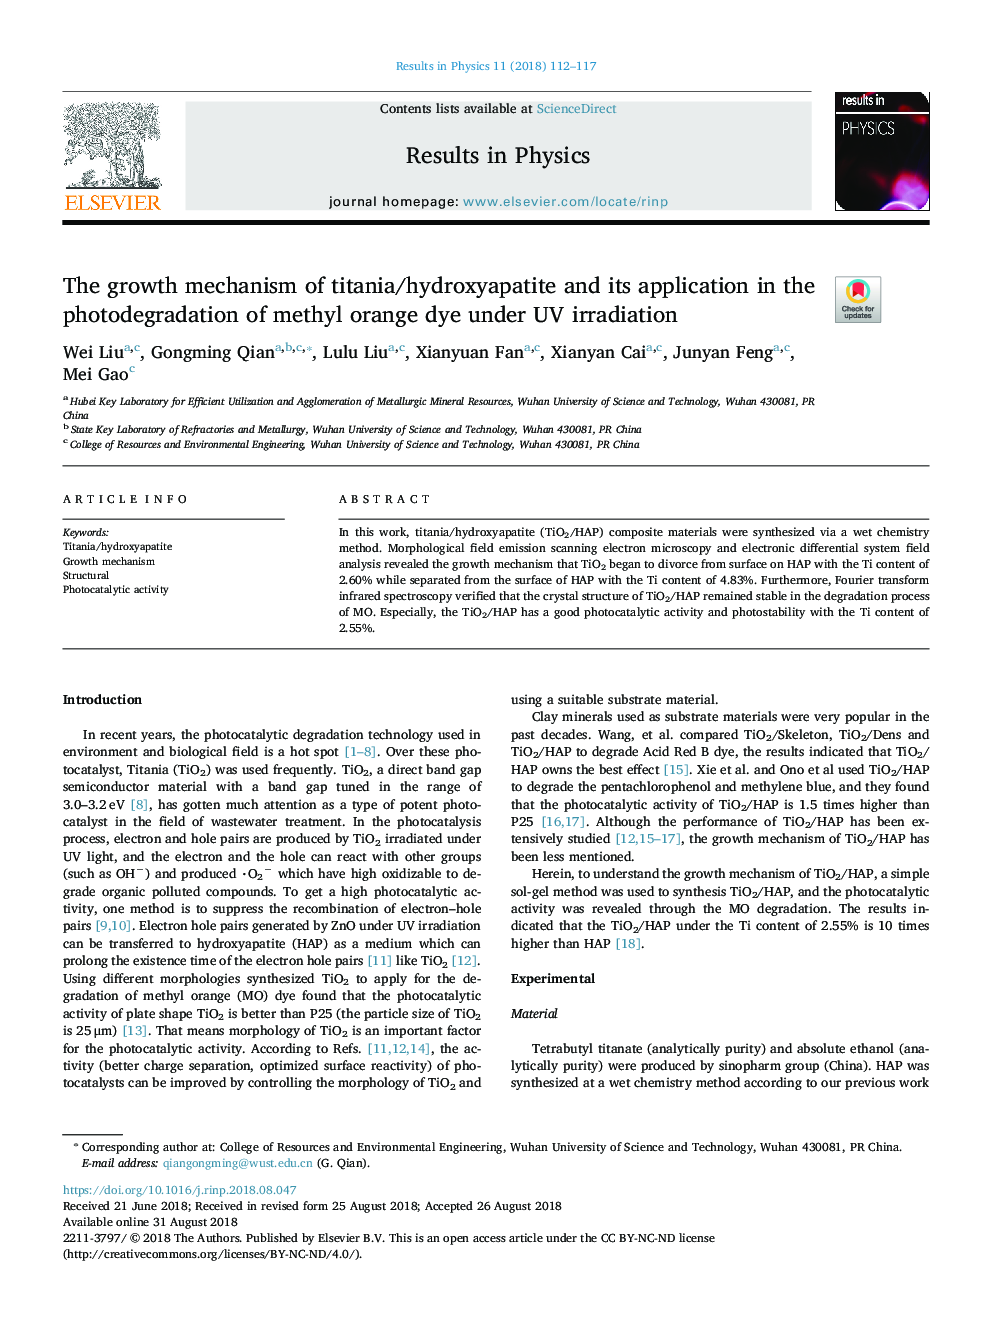 The growth mechanism of titania/hydroxyapatite and its application in the photodegradation of methyl orange dye under UV irradiation